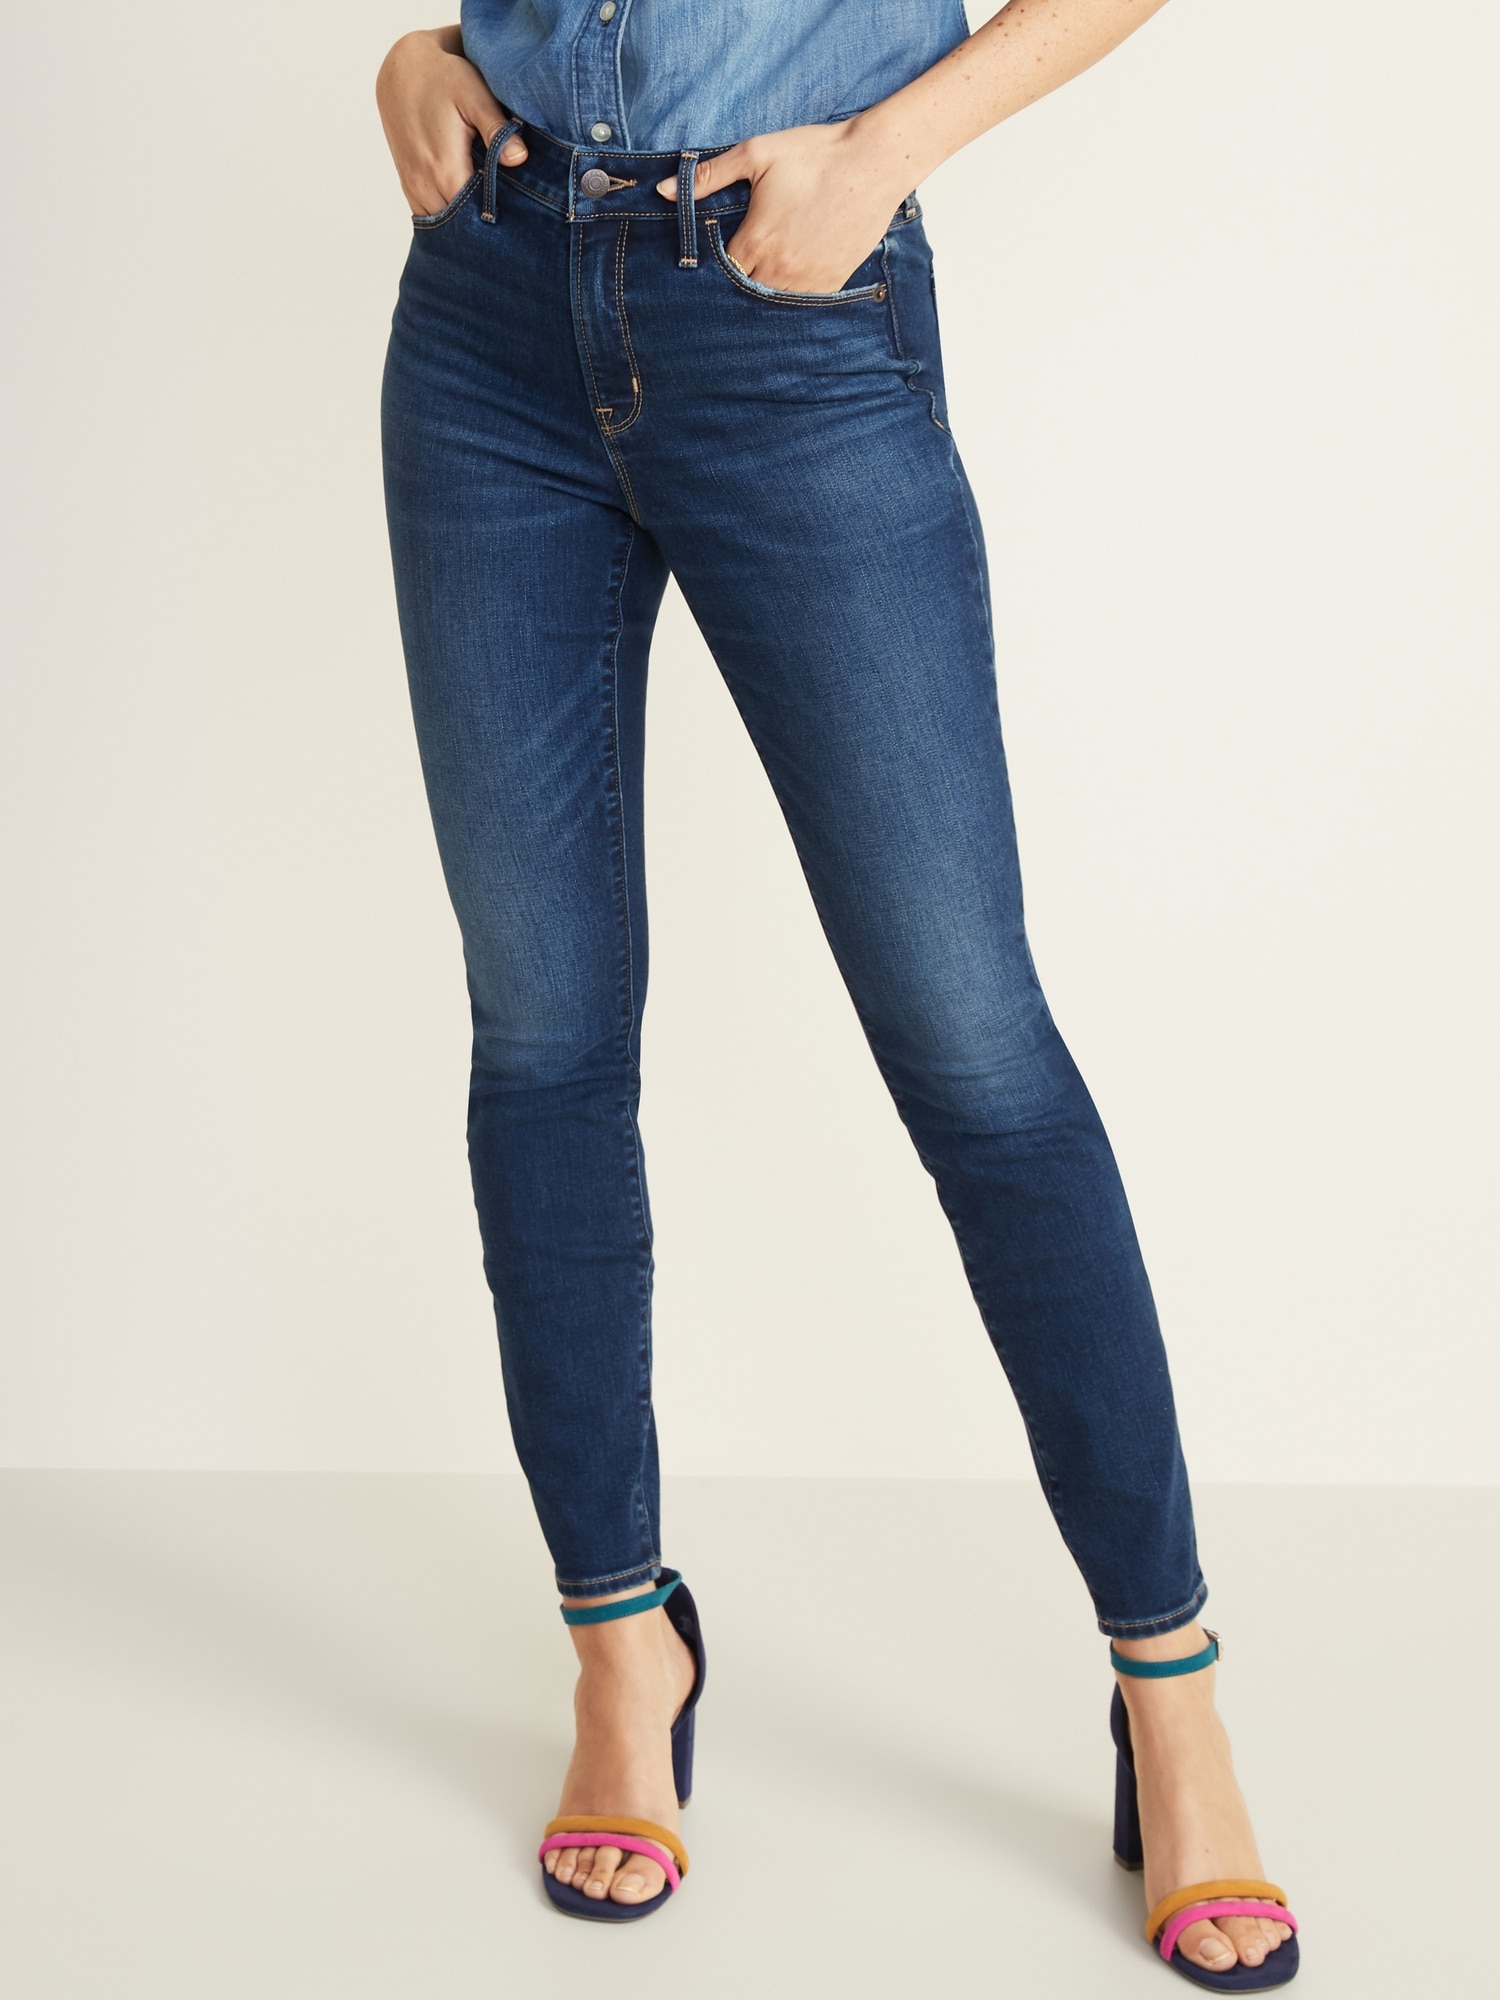 high waisted skinny jeans old navy